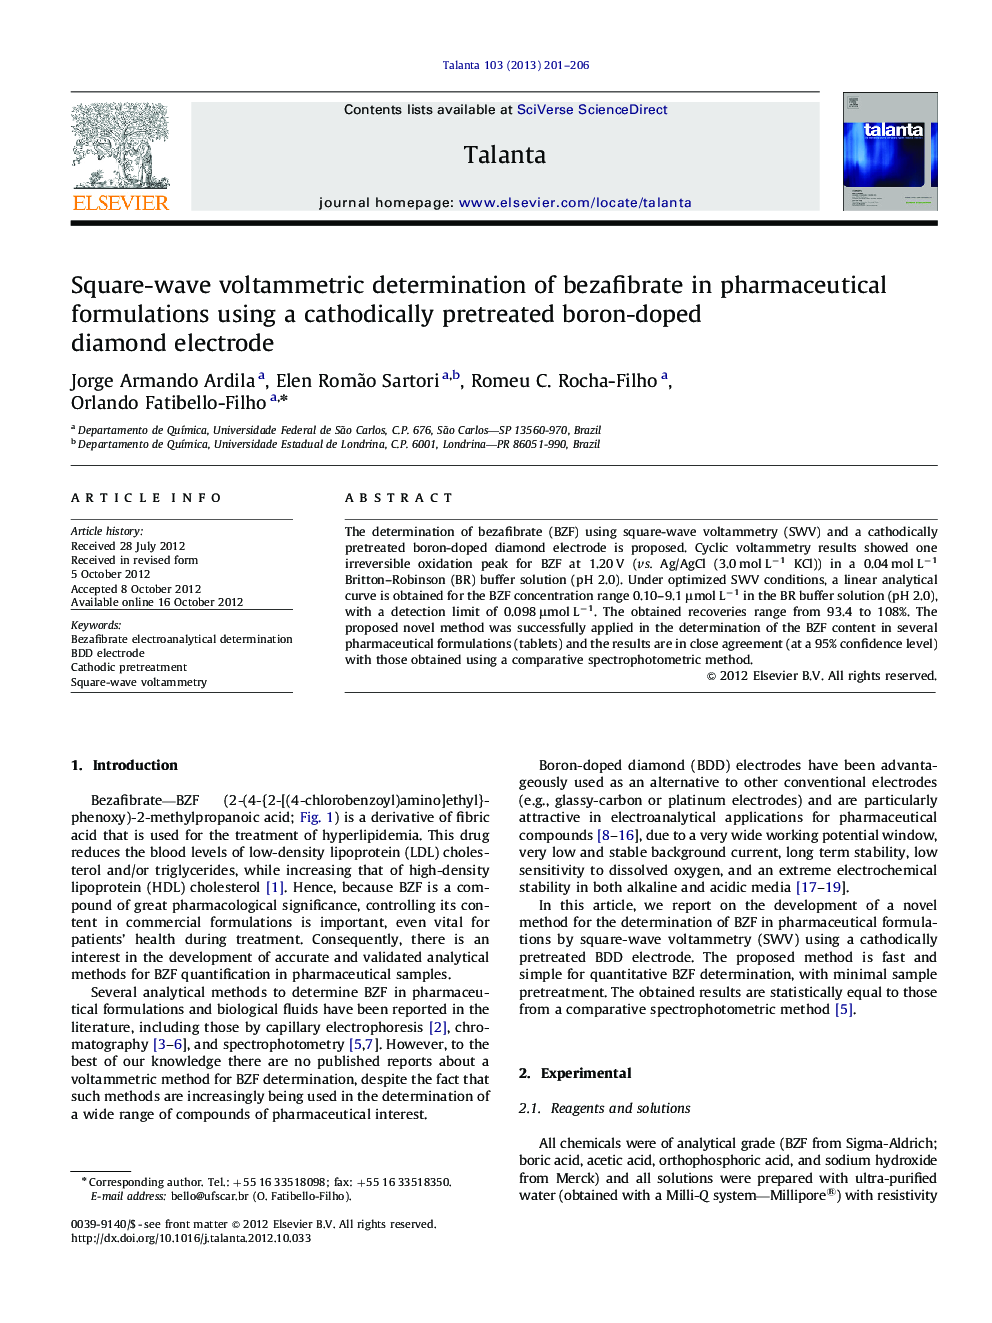 Square-wave voltammetric determination of bezafibrate in pharmaceutical formulations using a cathodically pretreated boron-doped diamond electrode